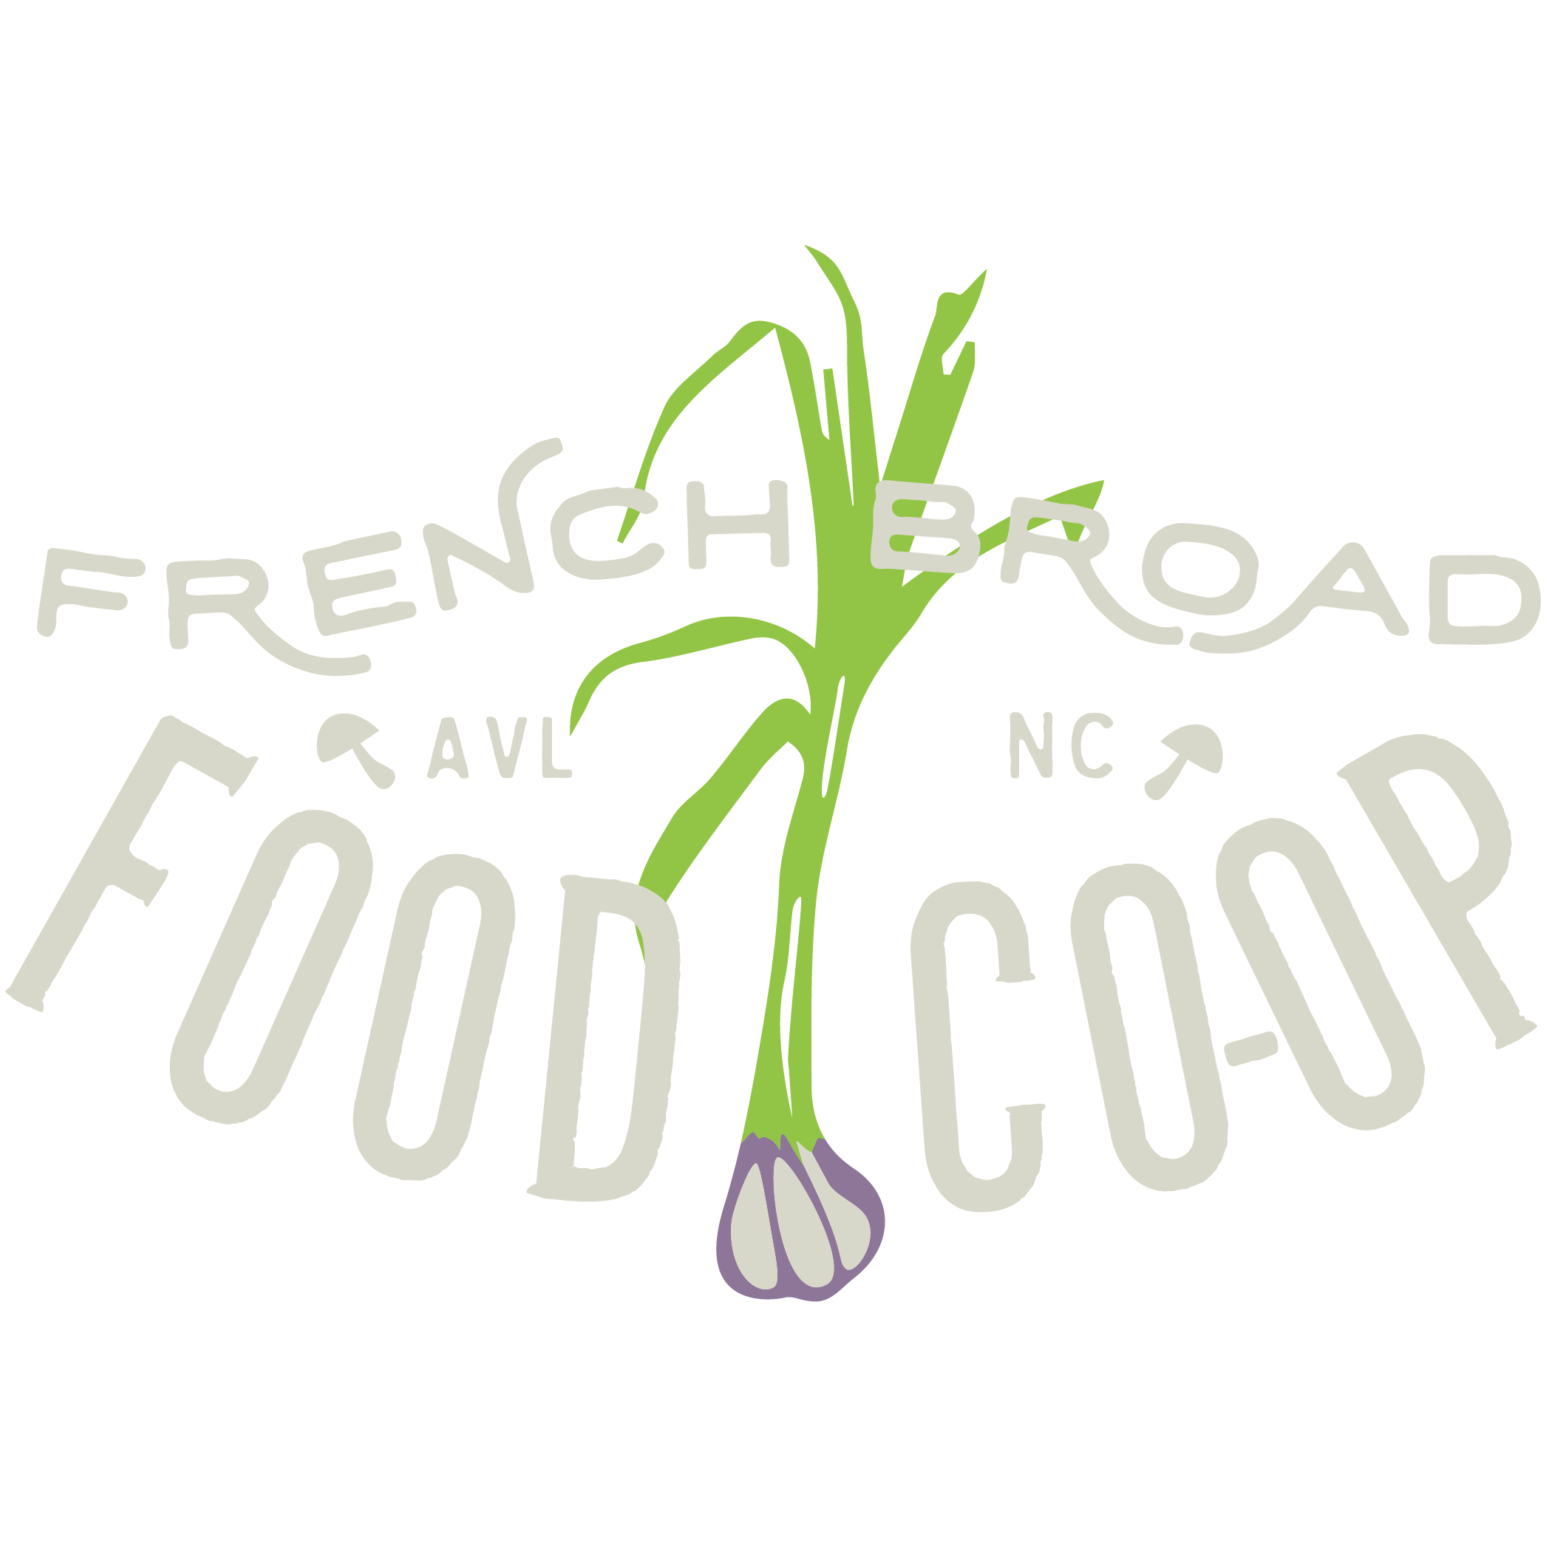 Products Sourced by French Broad Food Co-op